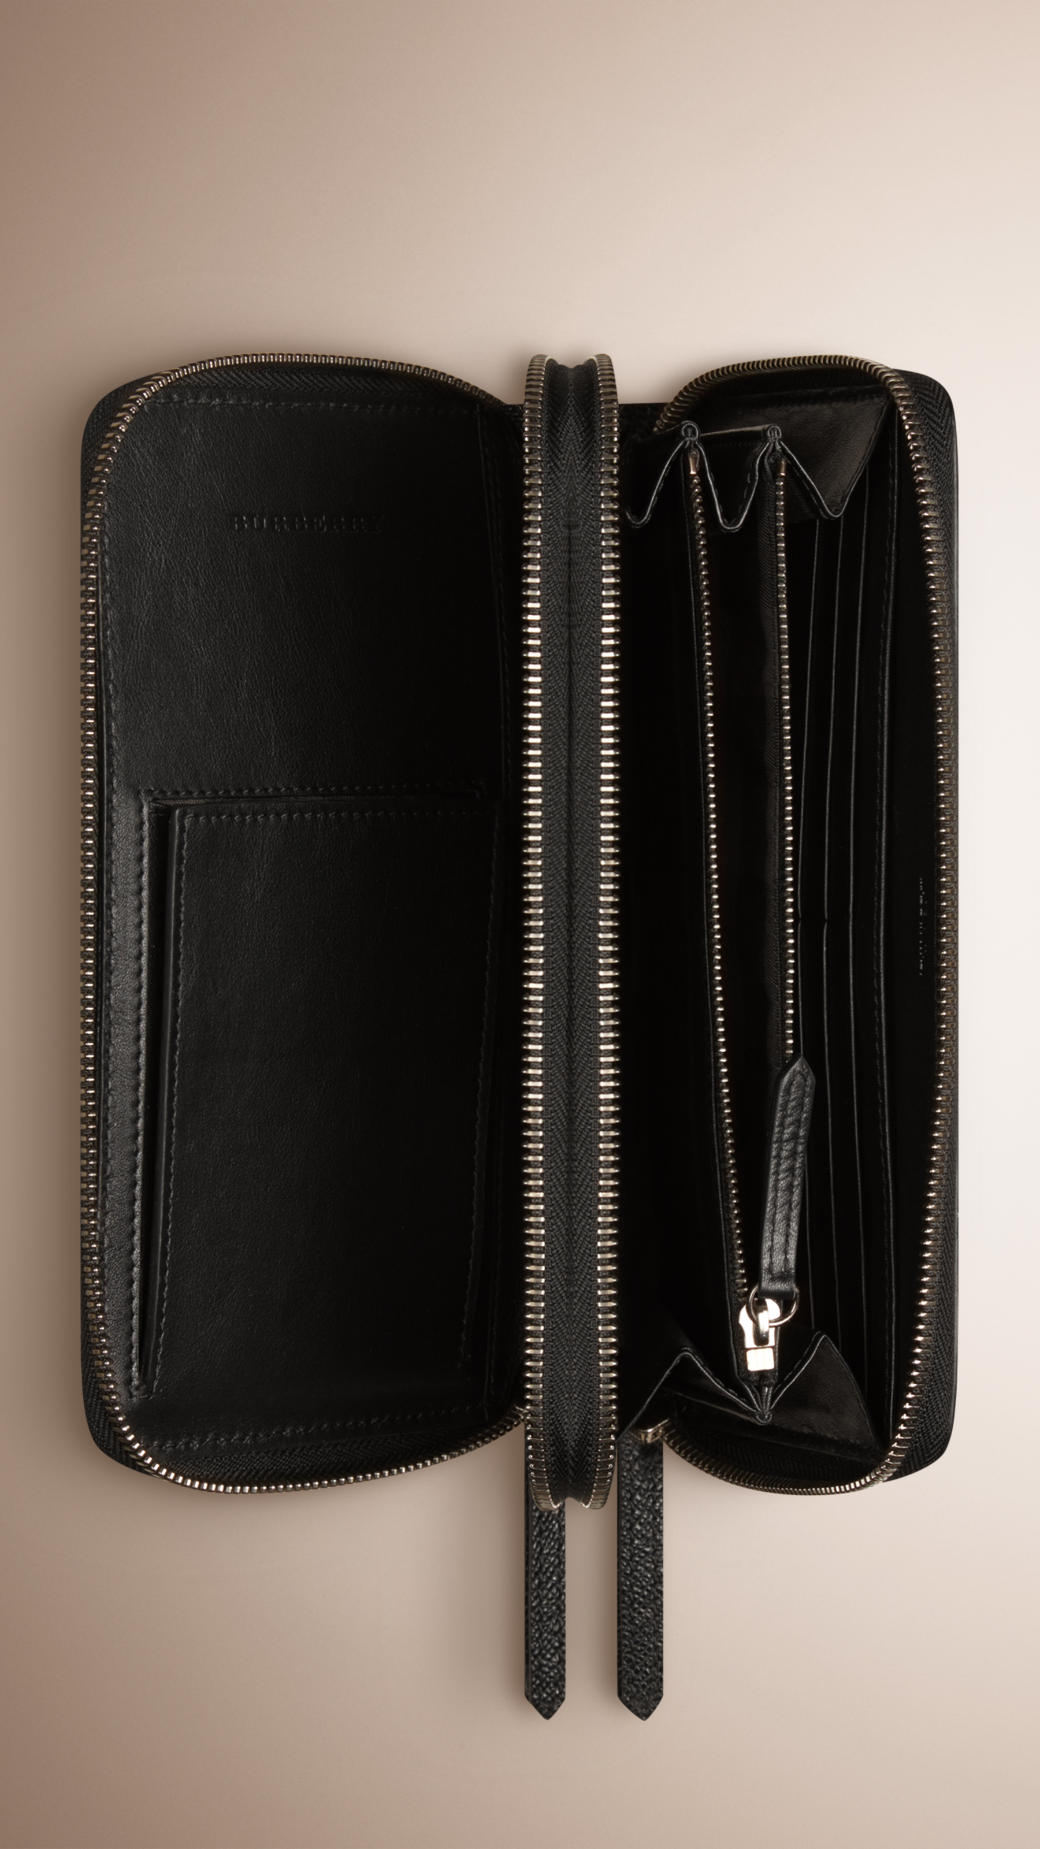 Burberry London Leather Travel Wallet Black - Lyst